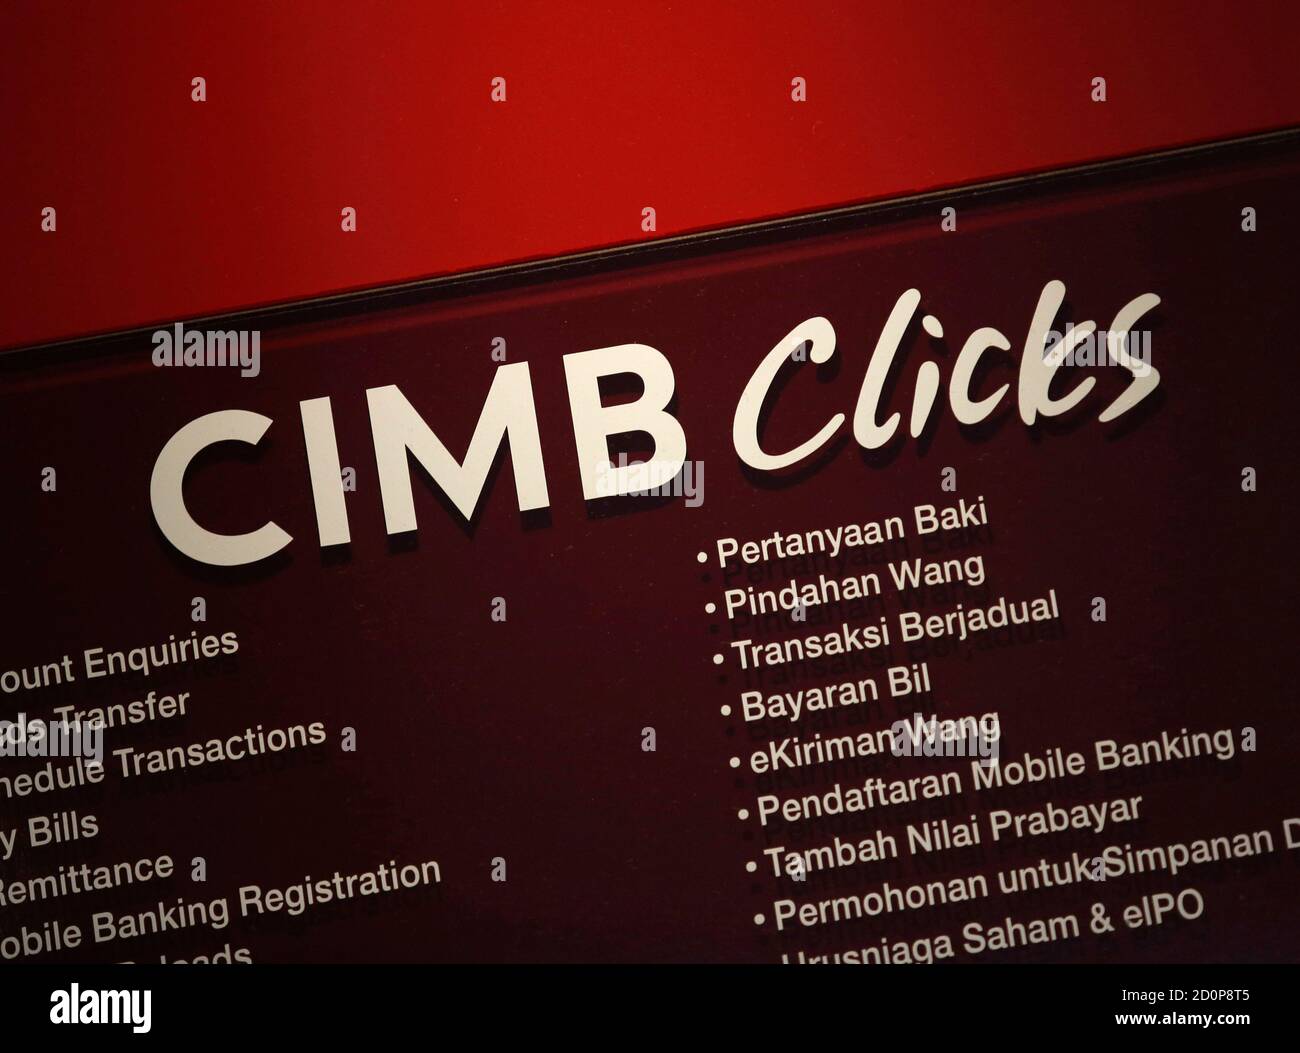 Cimb Bank High Resolution Stock Photography And Images Alamy